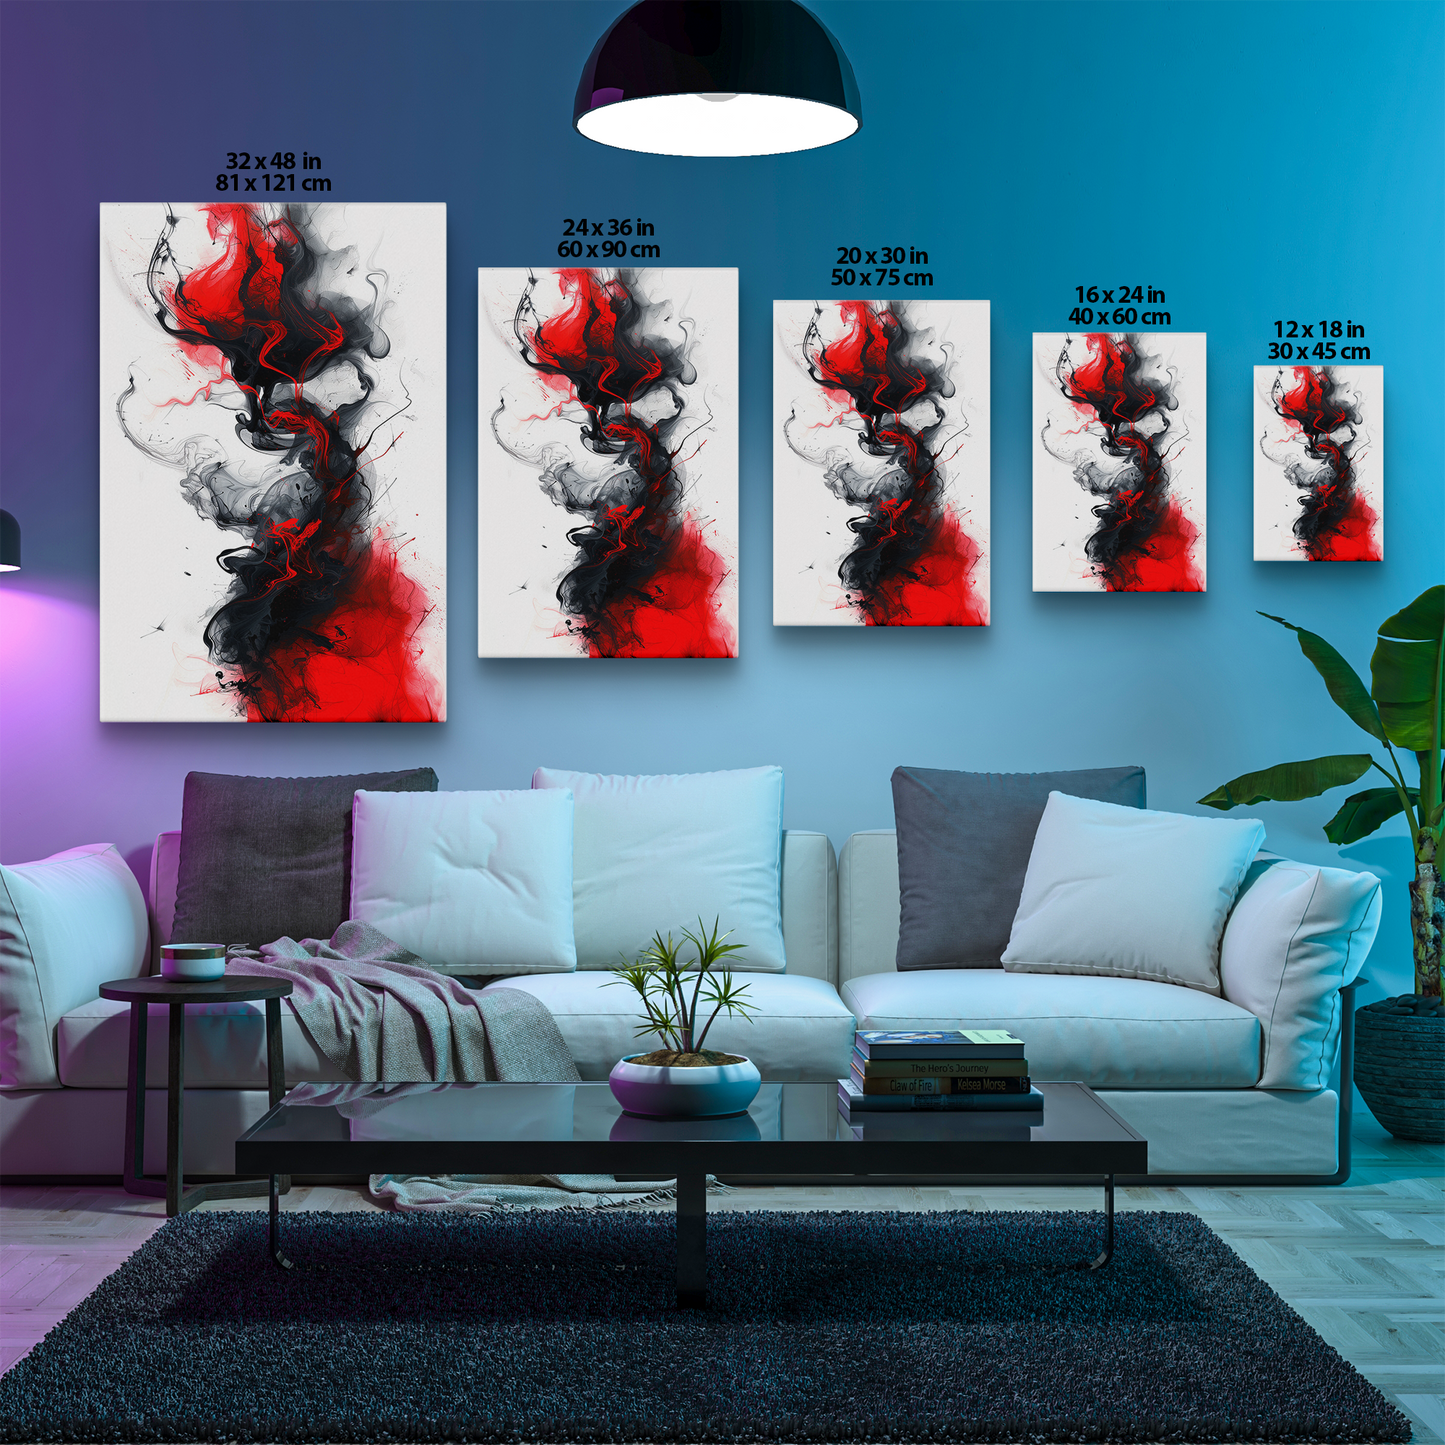 Scarlet Shadows (Canvas)Discover Scarlet Shadows at RimaGallery: a premium, eco-friendly canvas celebrating quality and sustainability. Elevate your space with vibrant, lasting art.RimaGallery